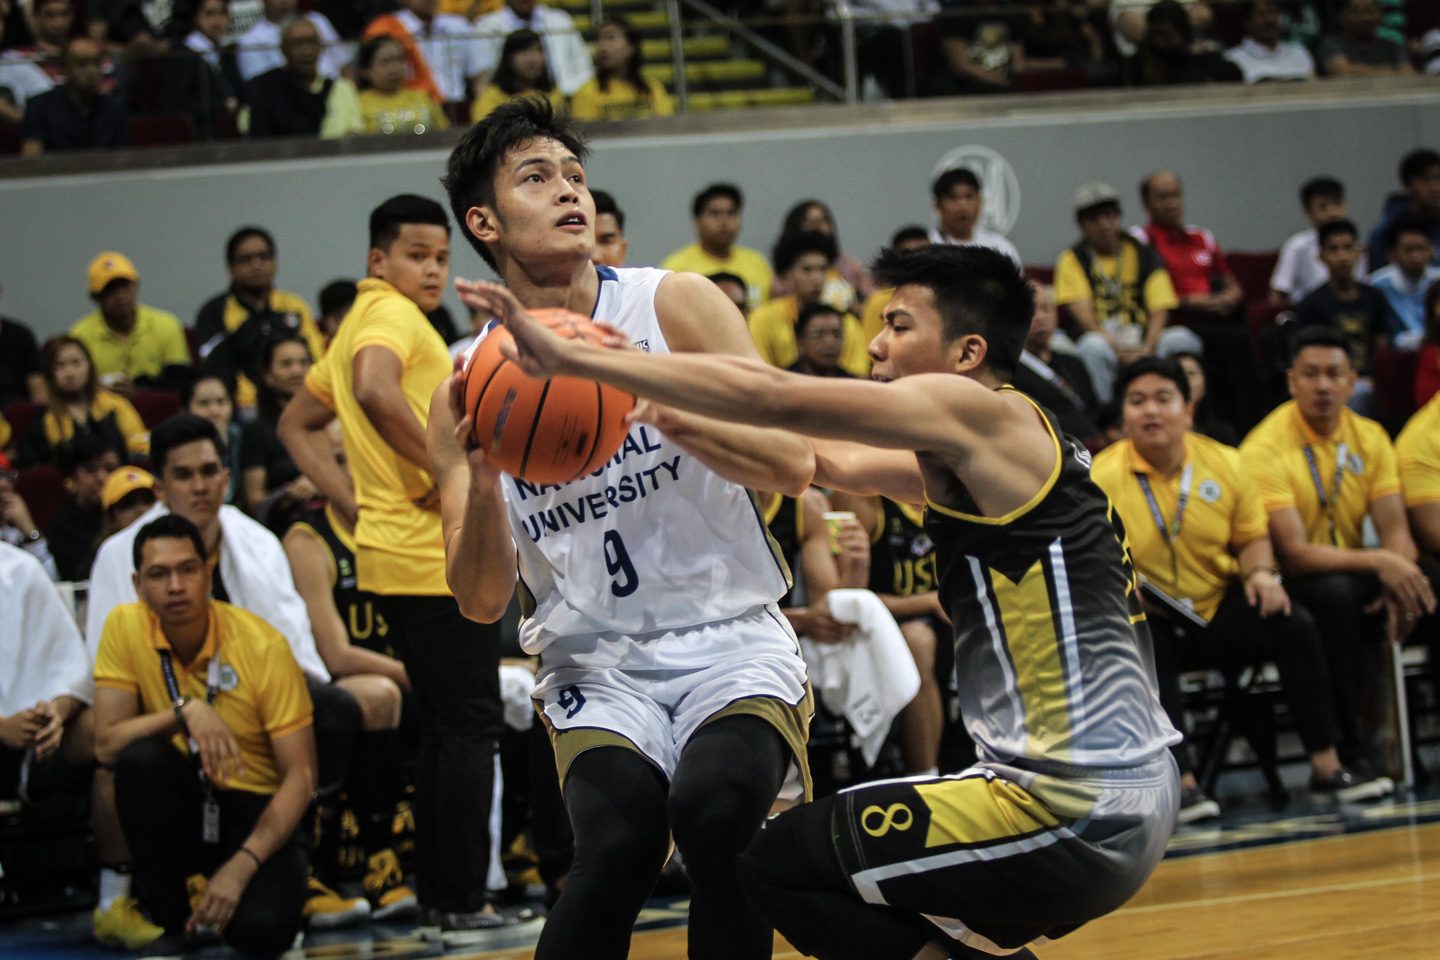 NU’s John Lloyd Clemente finally gets to live his dream